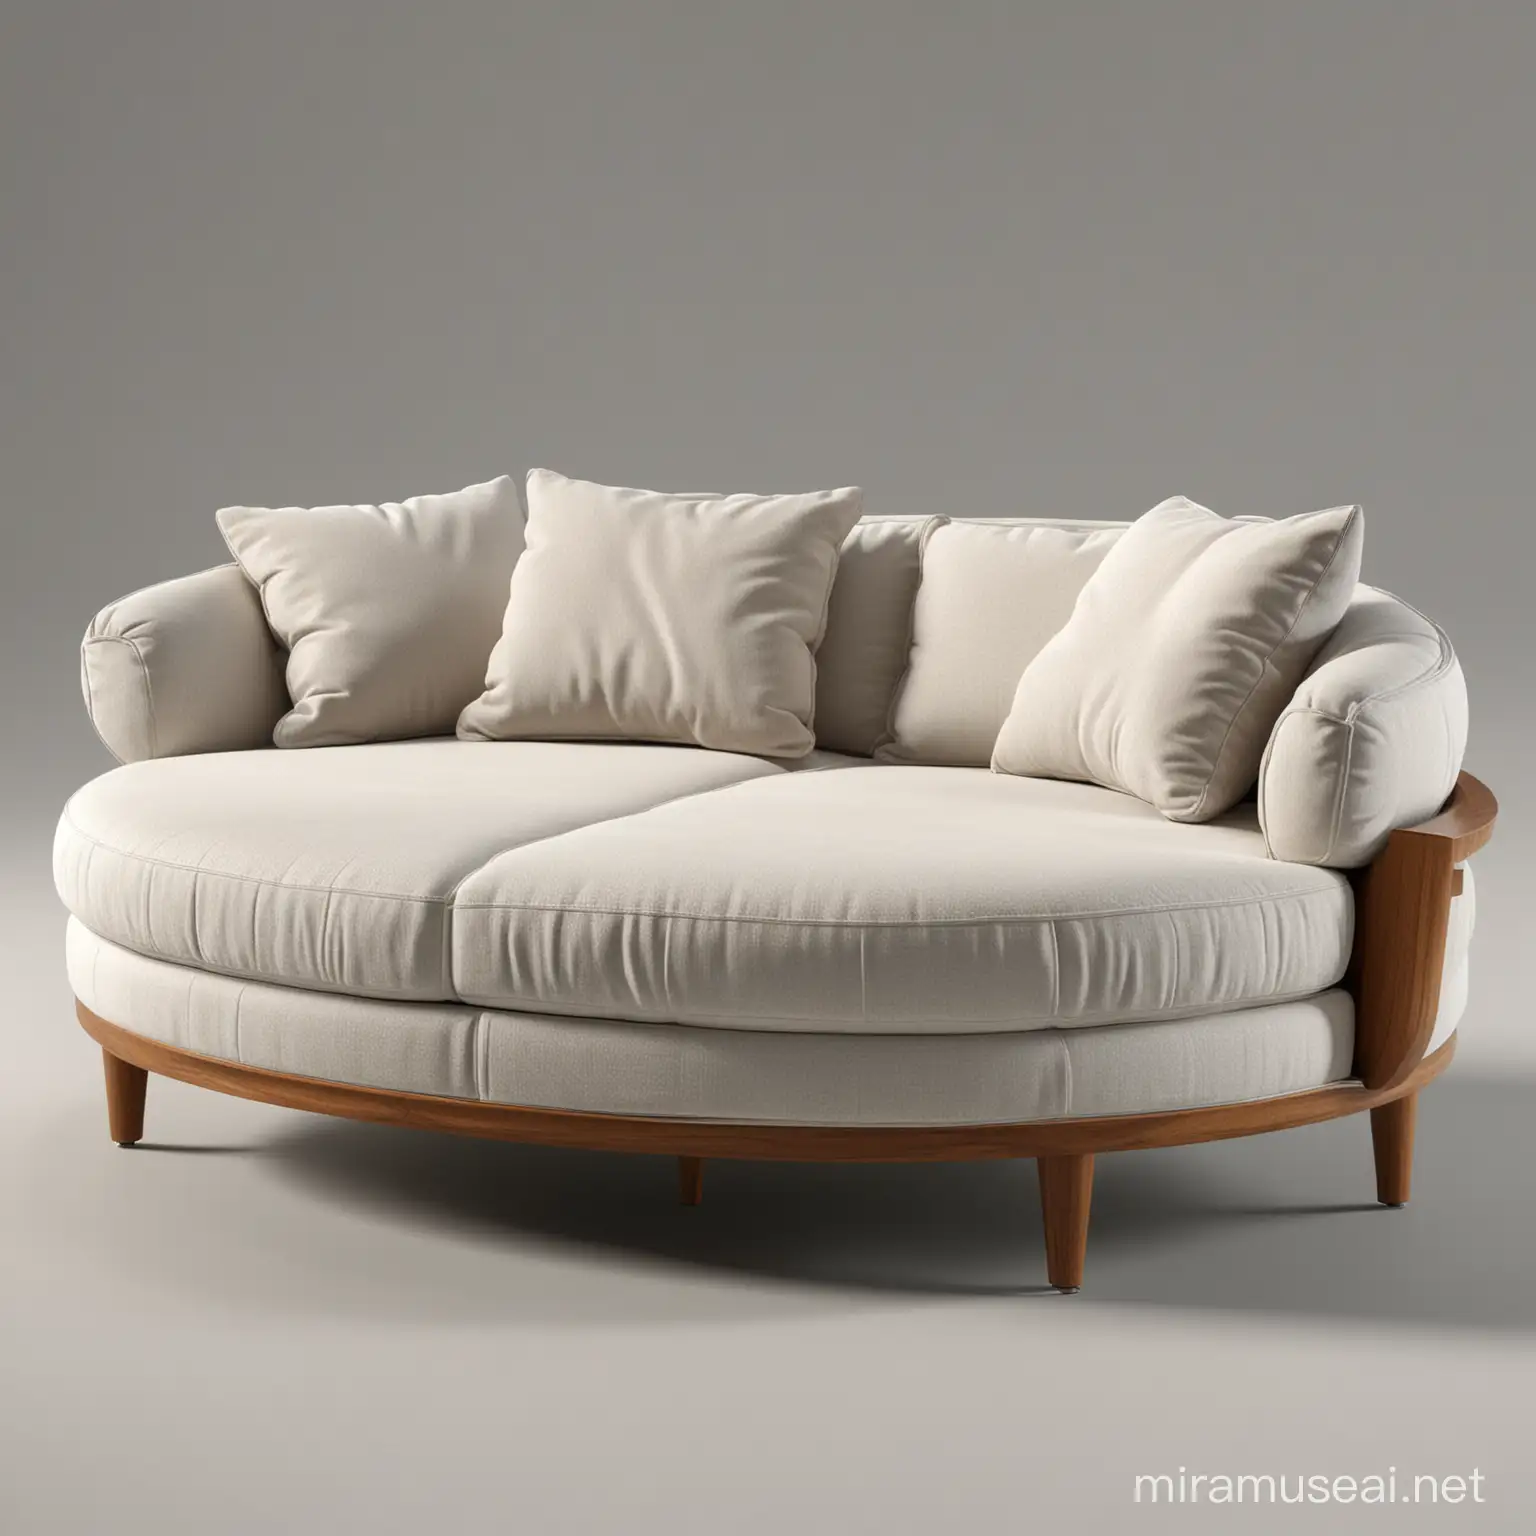 Italian Design European Sofa with Round Cushion and Mechanical Features